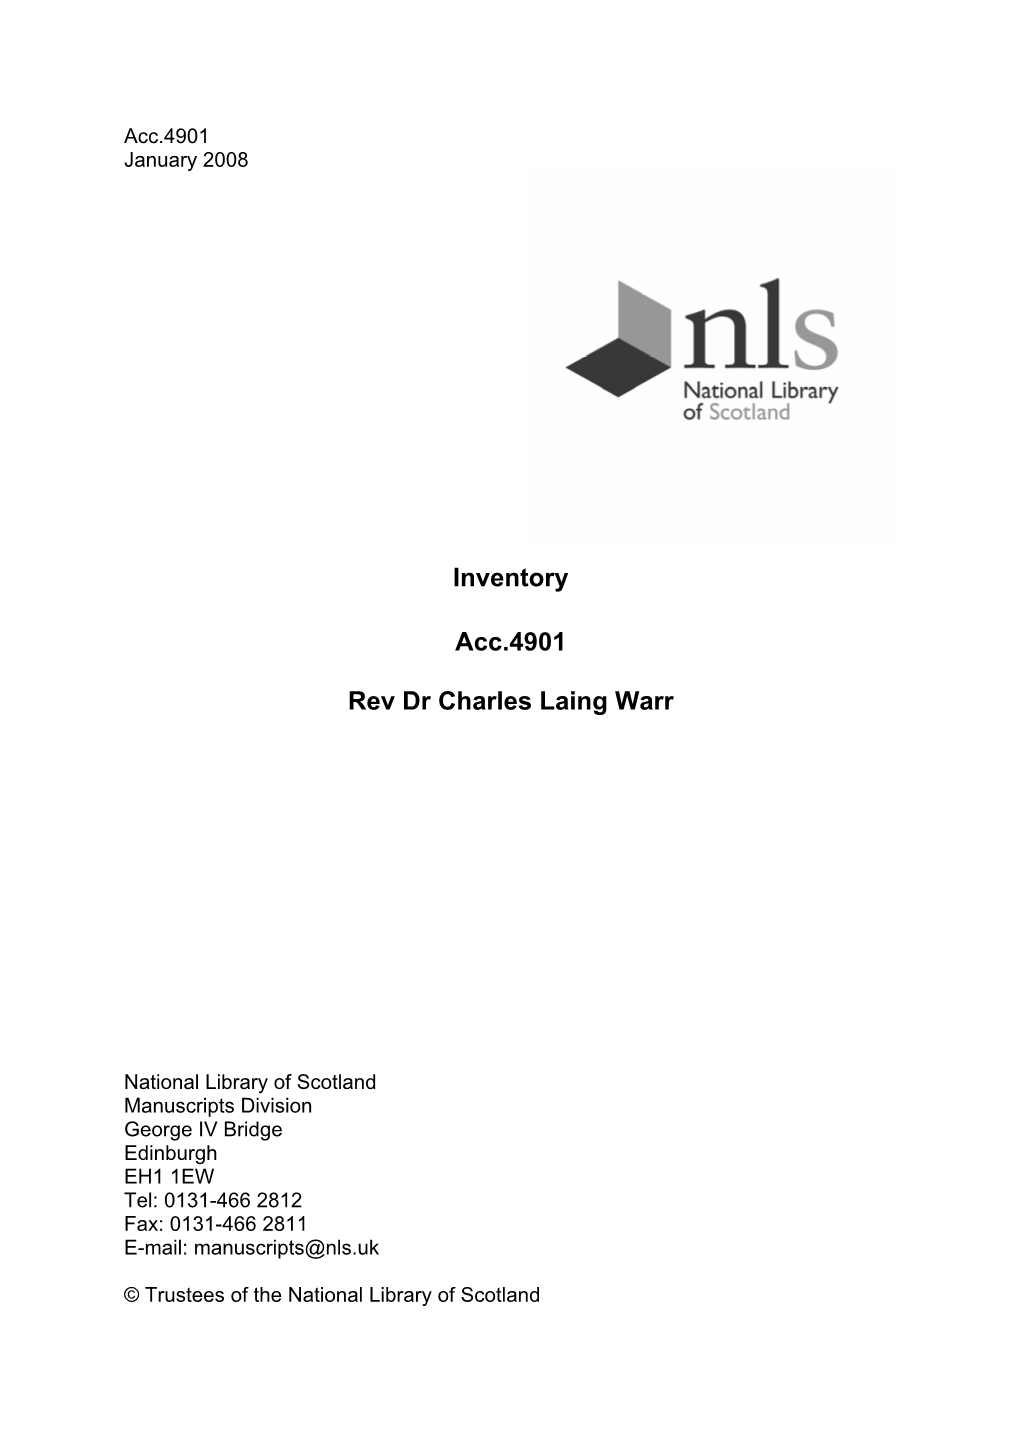 Inventory Acc.4901 Rev Dr Charles Laing Warr